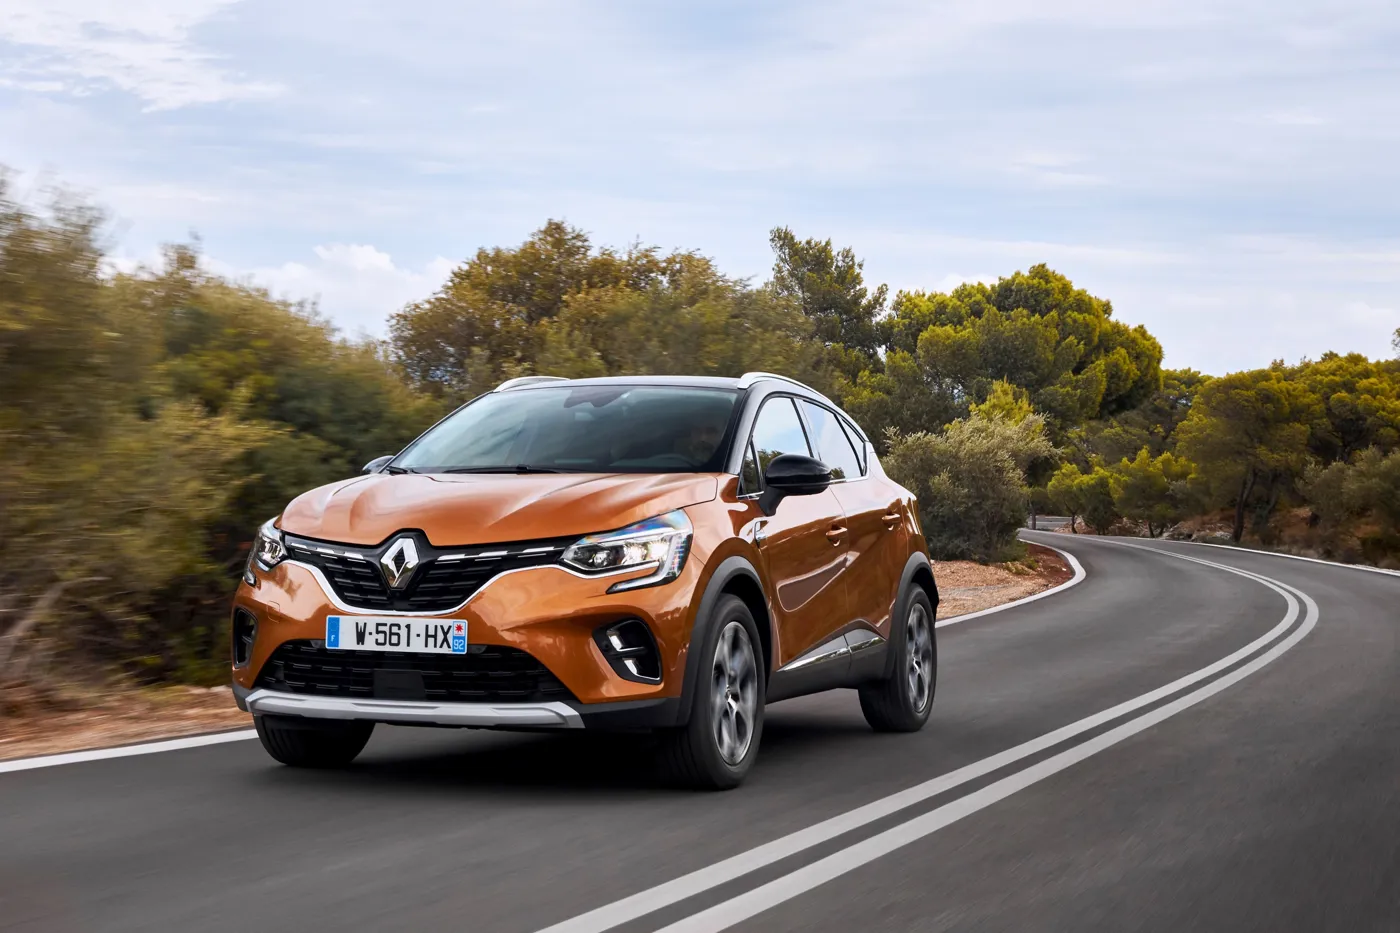 This is the brand new Renault Captur. No, seriously